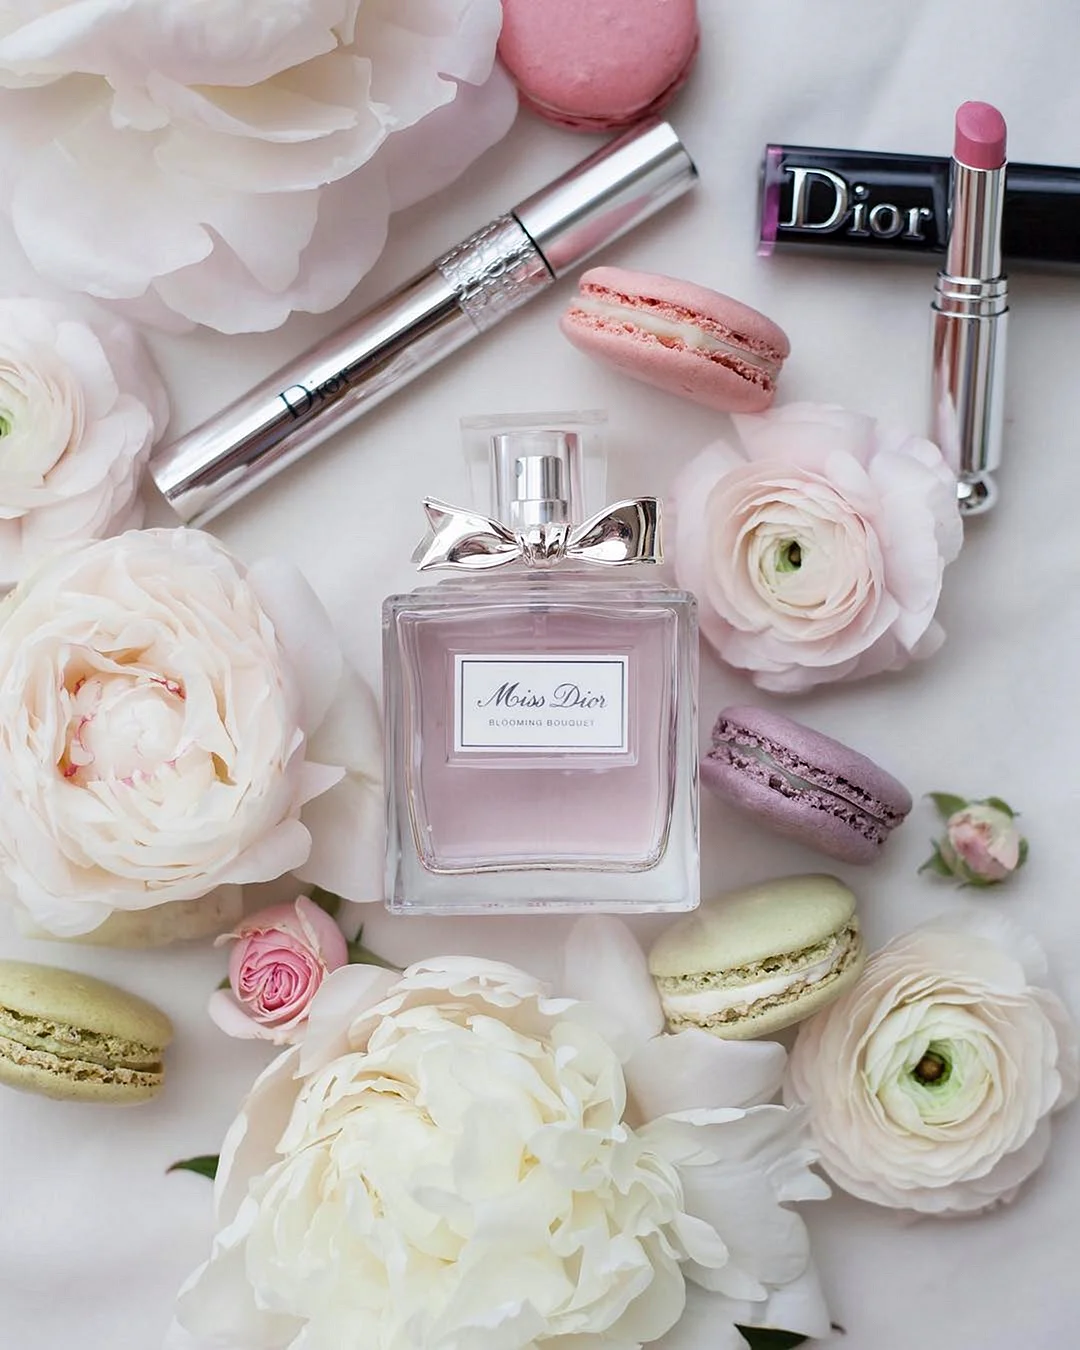 Dior Beauty Perfume Wallpaper For iPhone